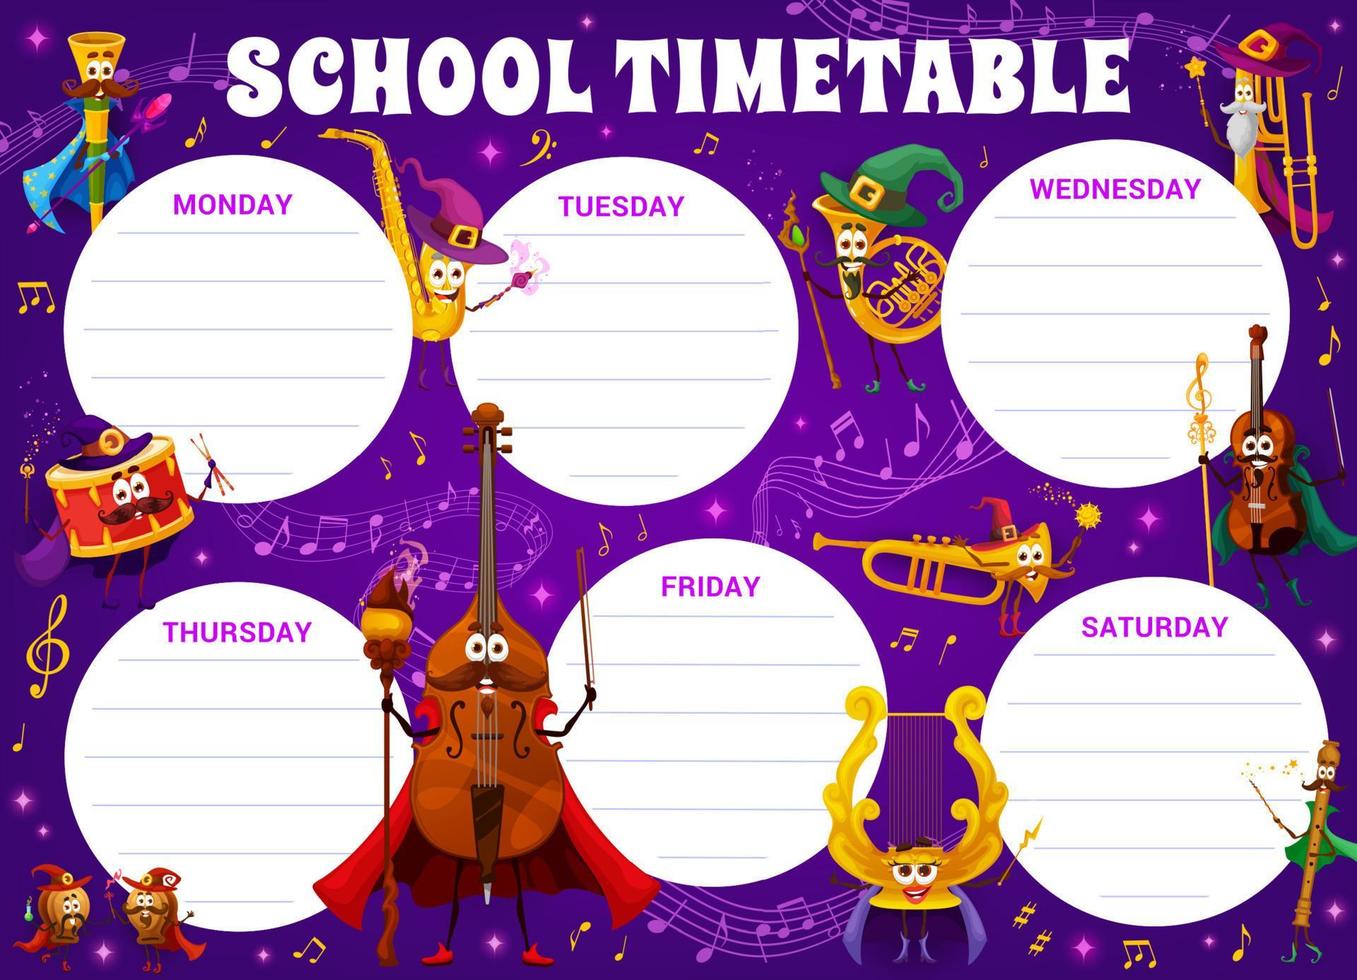 Timetable wizard musical instrument characters vector